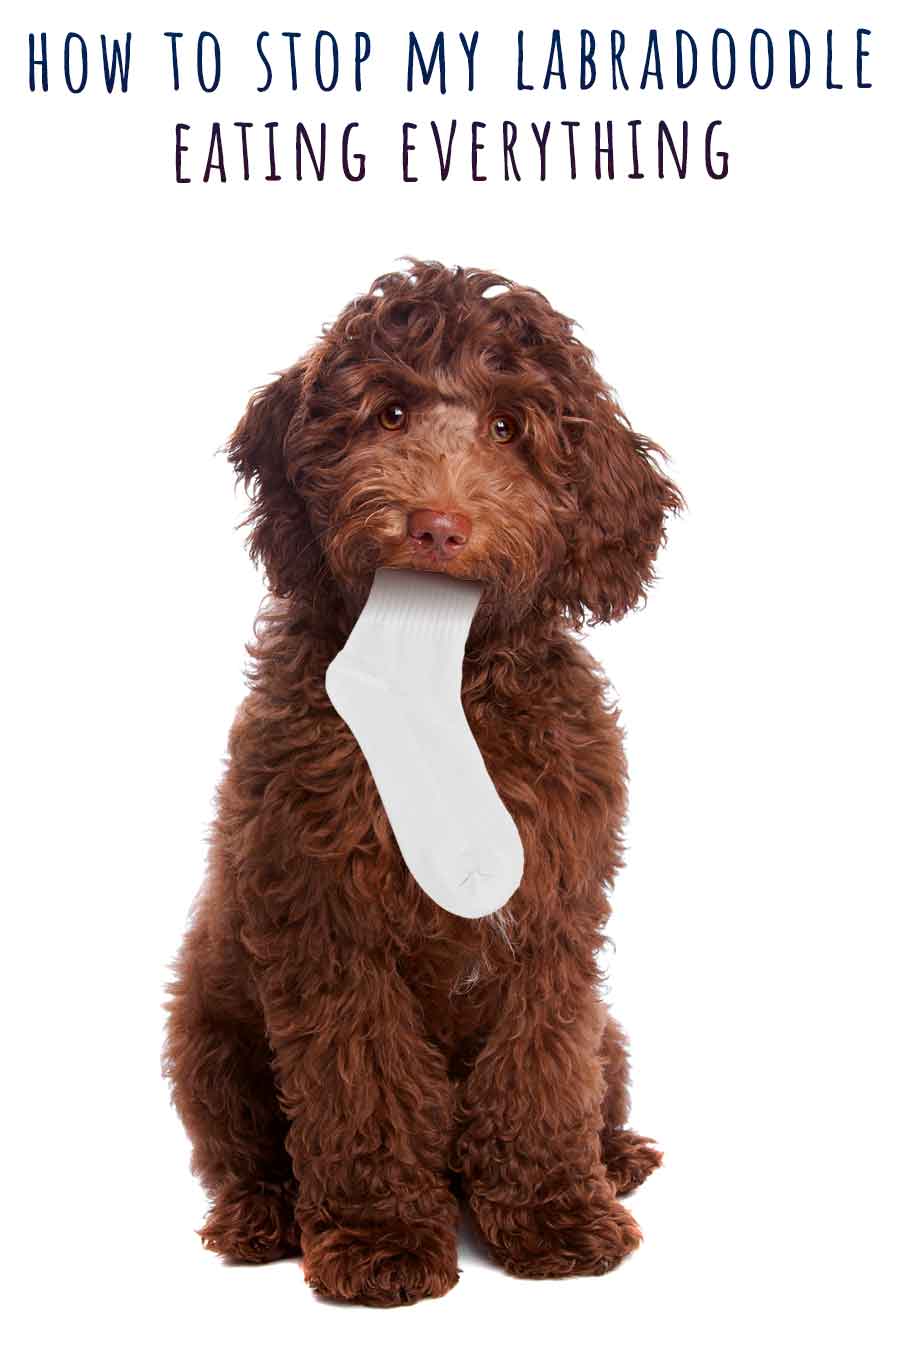 how to stop my labradoodle eating everything LDS long